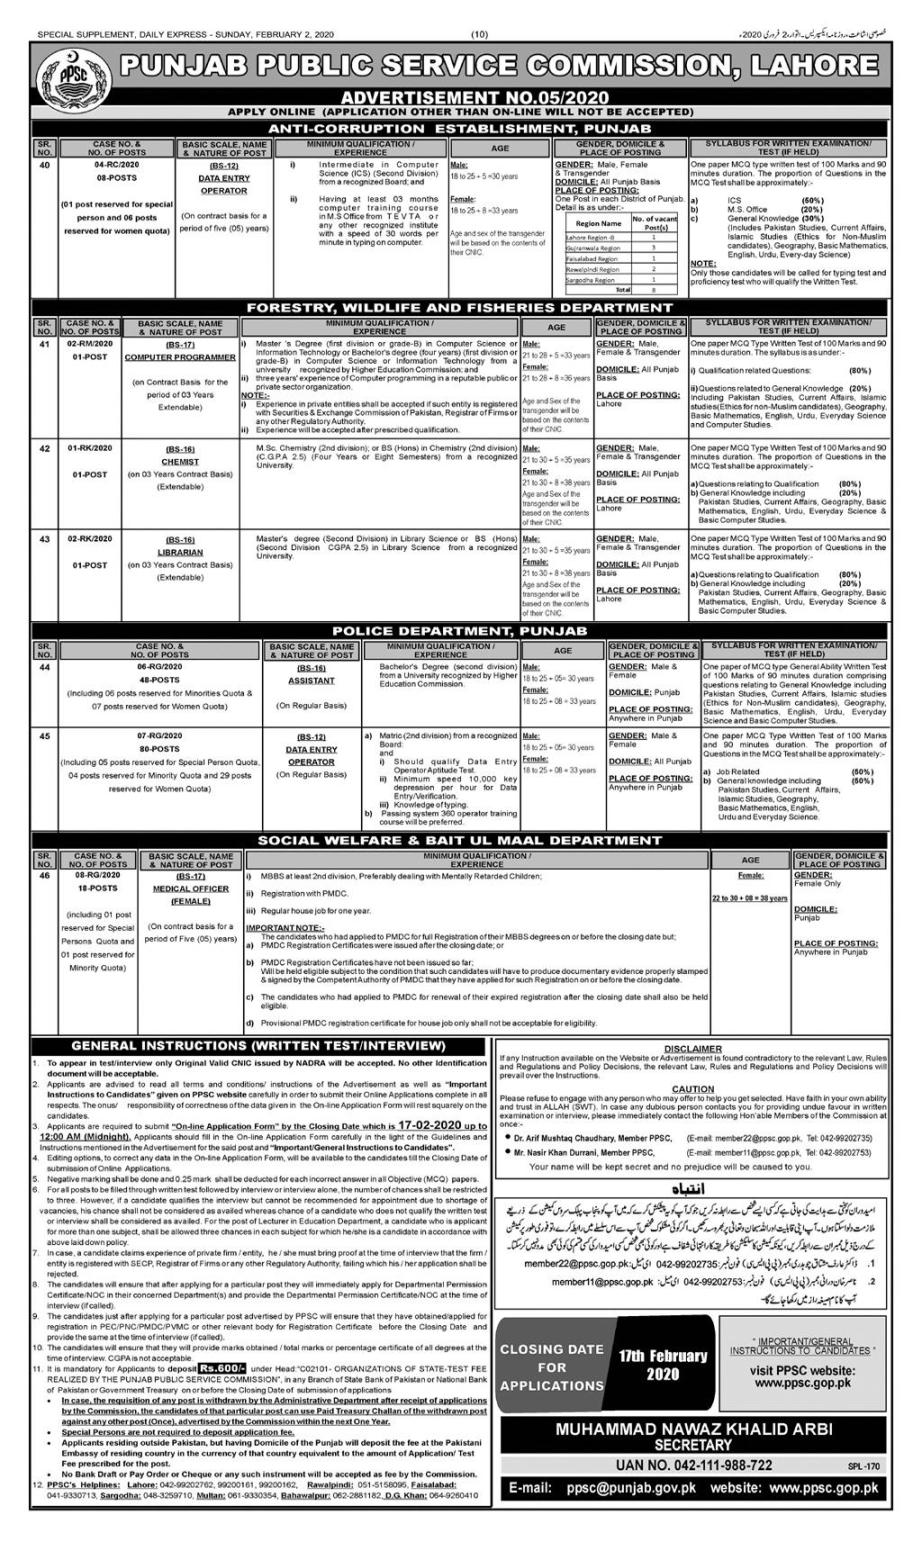 PPSC Jobs 2020 Police and Anti-corruption departments